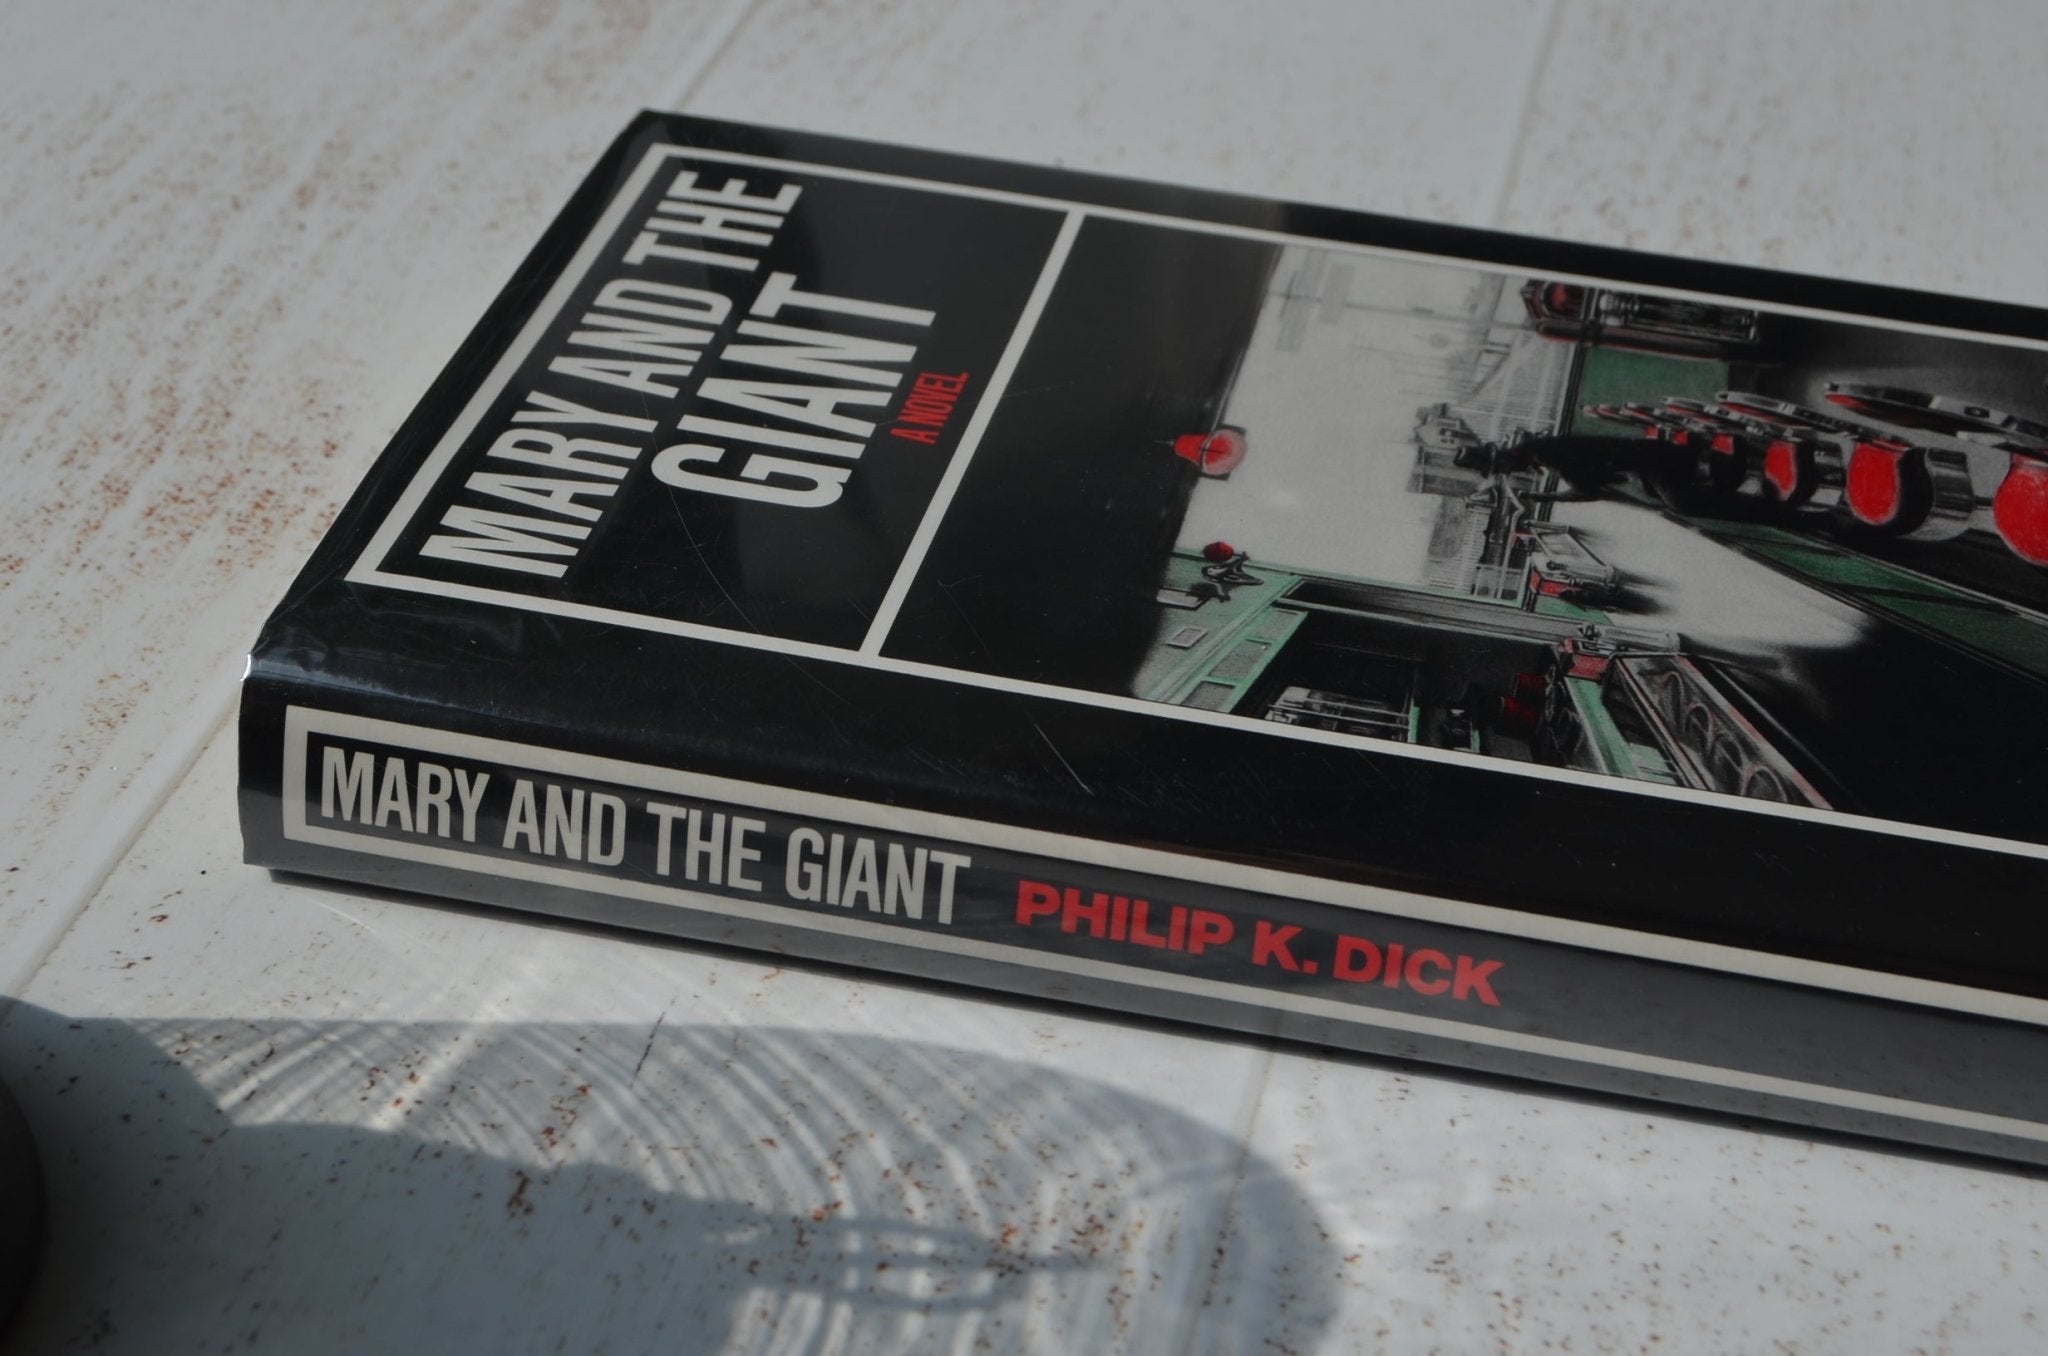 First Edition – Mary and the Giant by Philip K. Dick 1987 - Brookfield Books